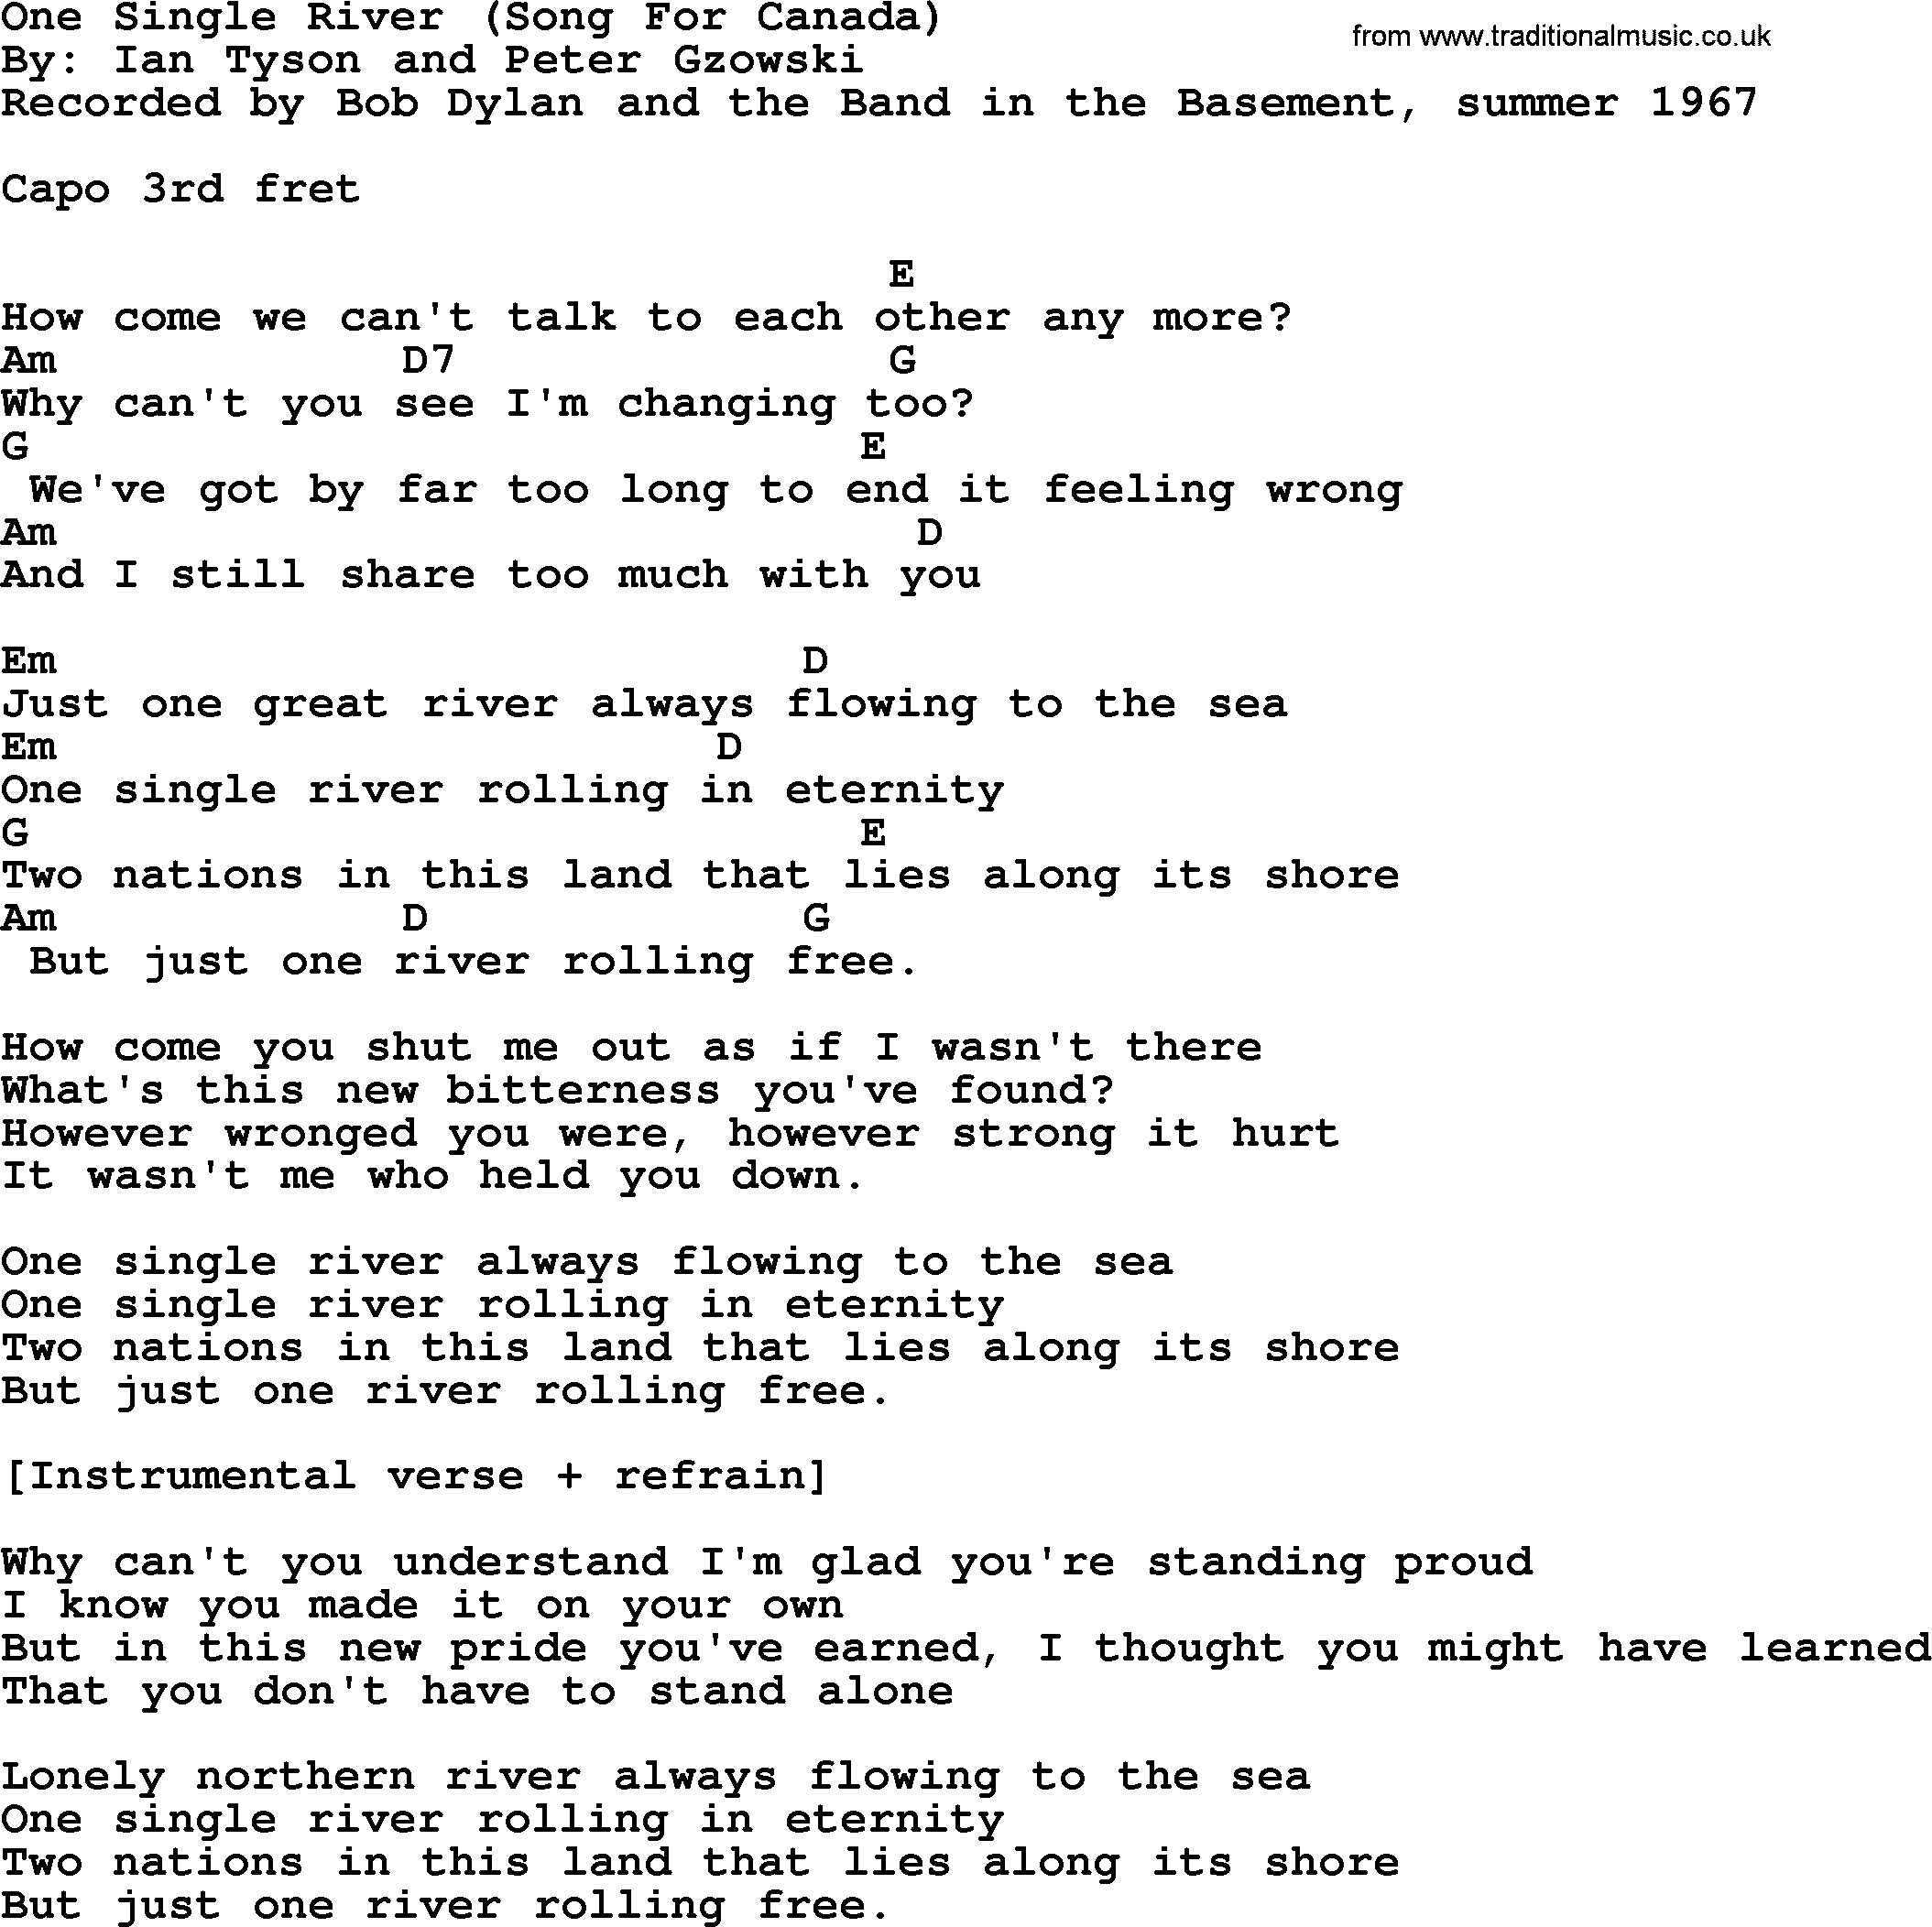 Bob Dylan song, lyrics with chords - One Single River (Song For Canada)